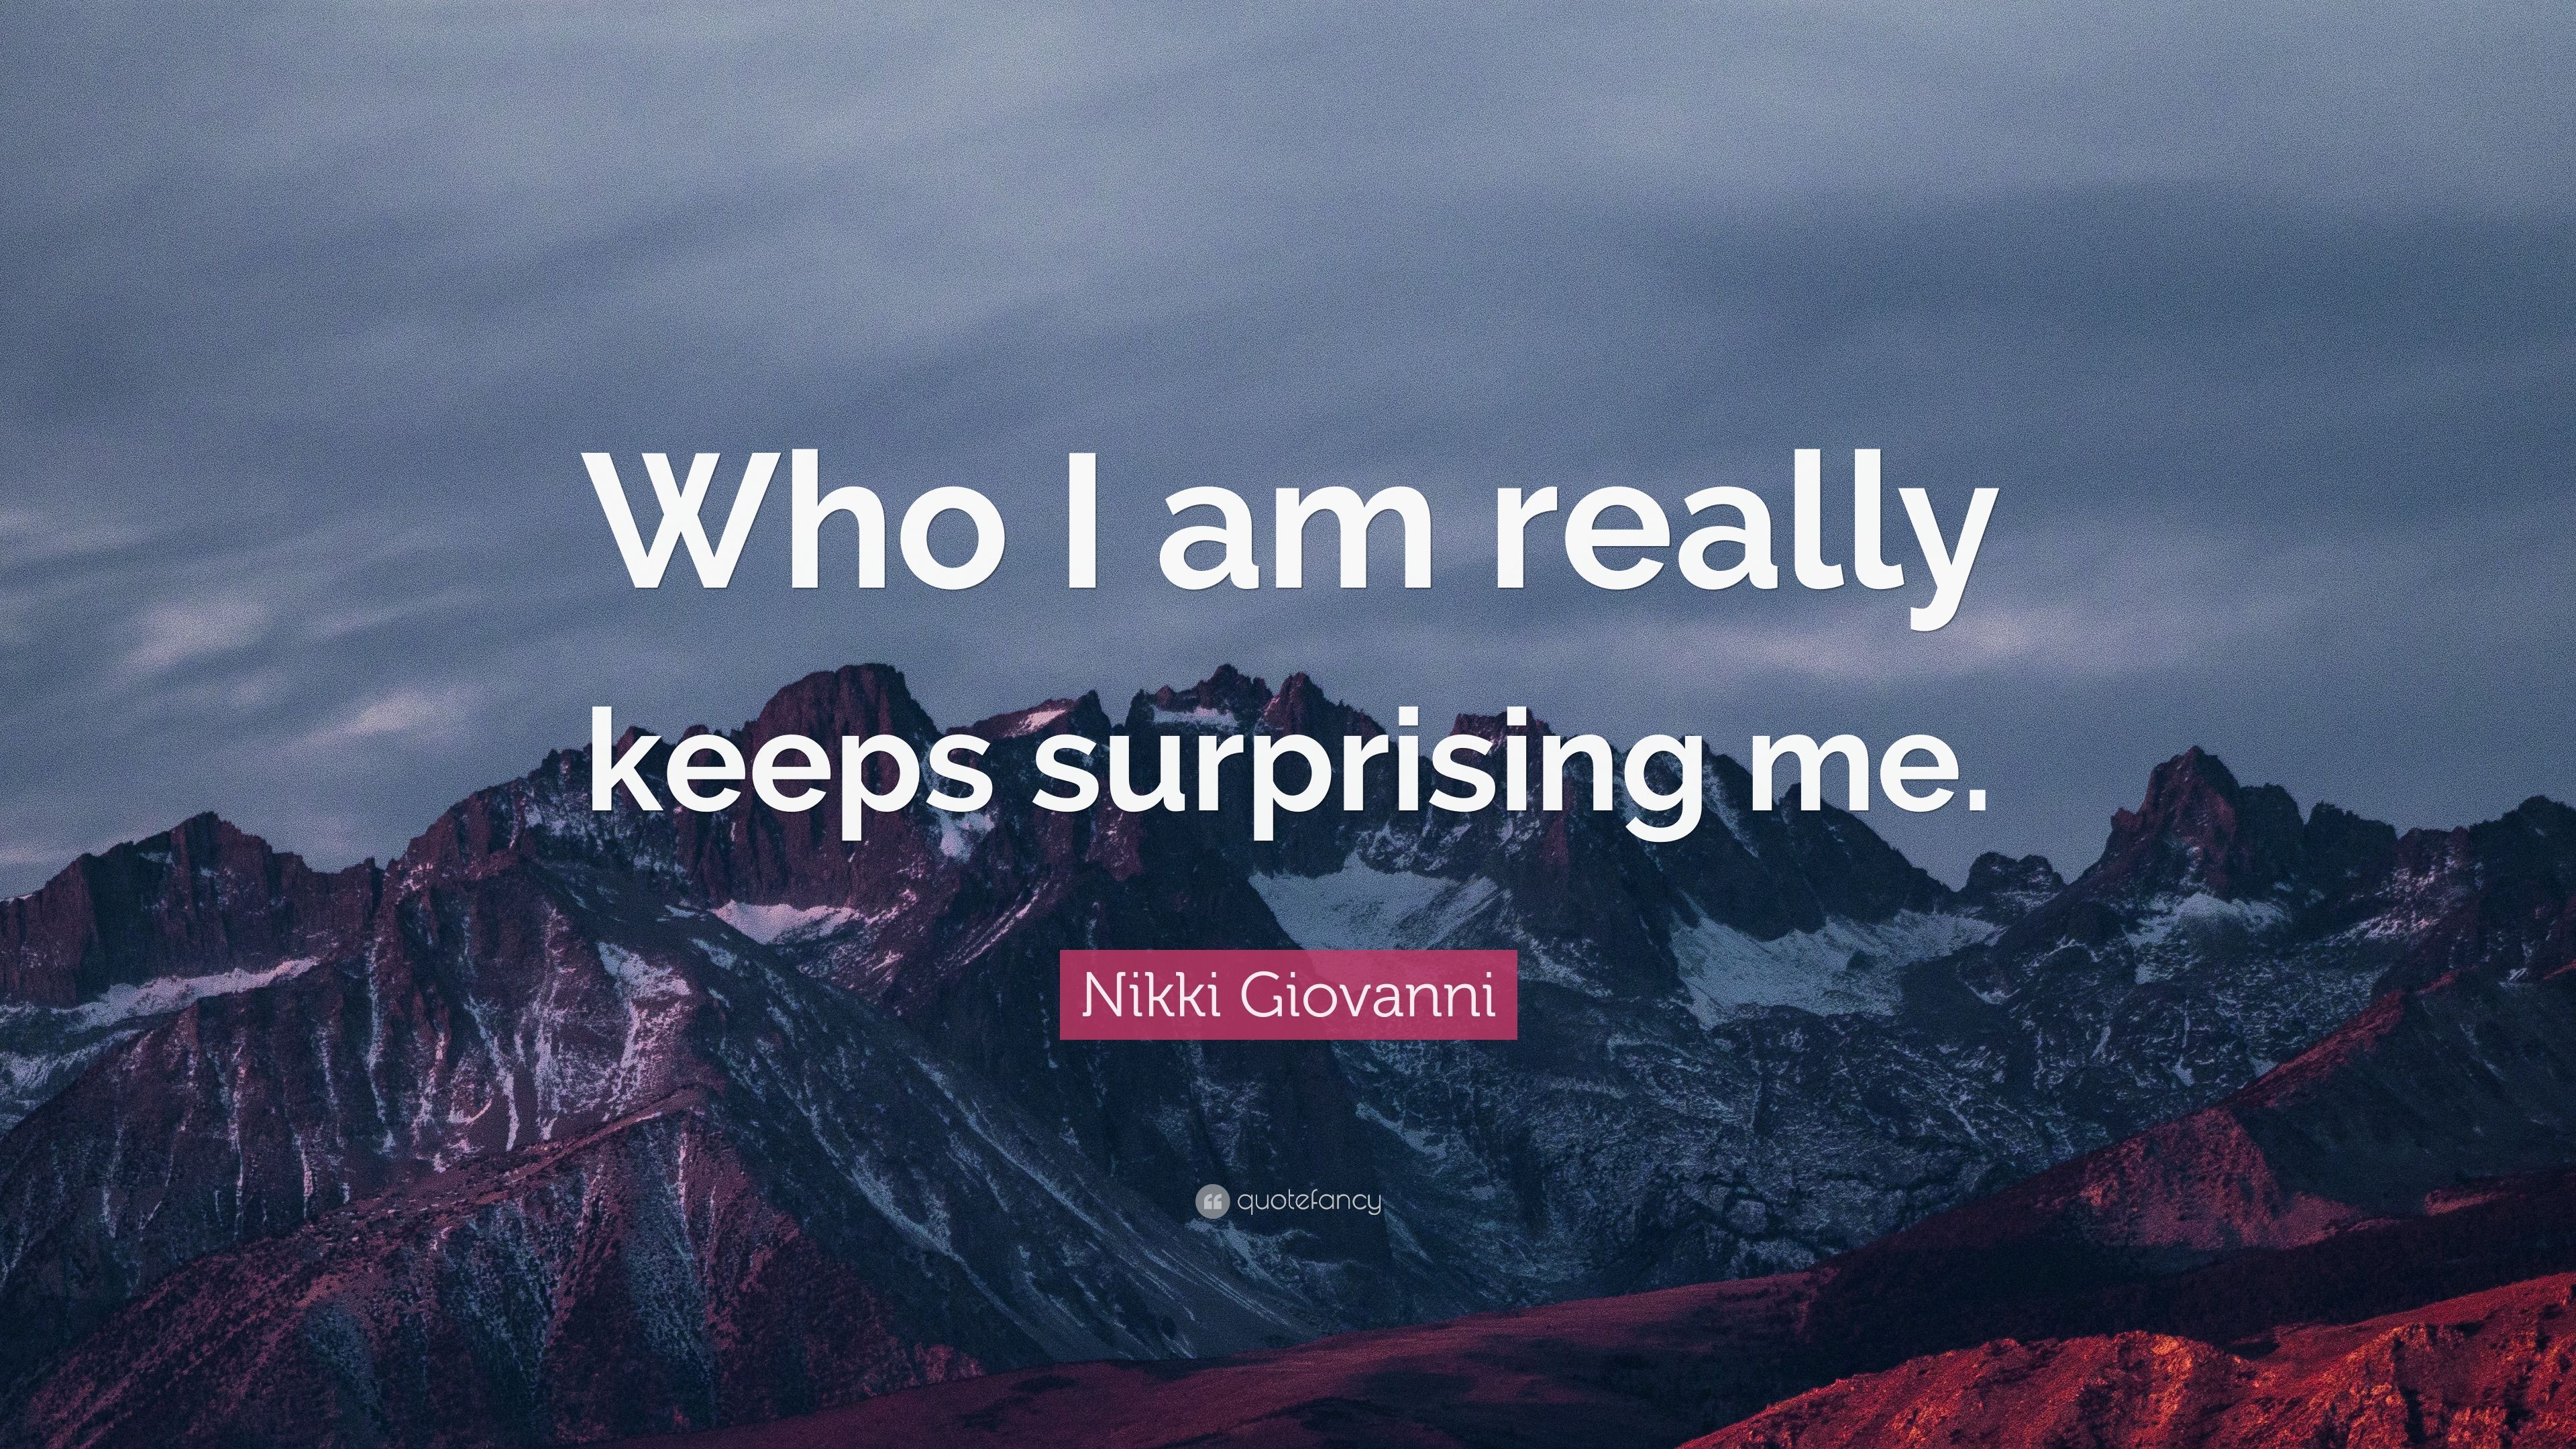 Nikki Giovanni Quote: “Who I am really keeps surprising me.” 7